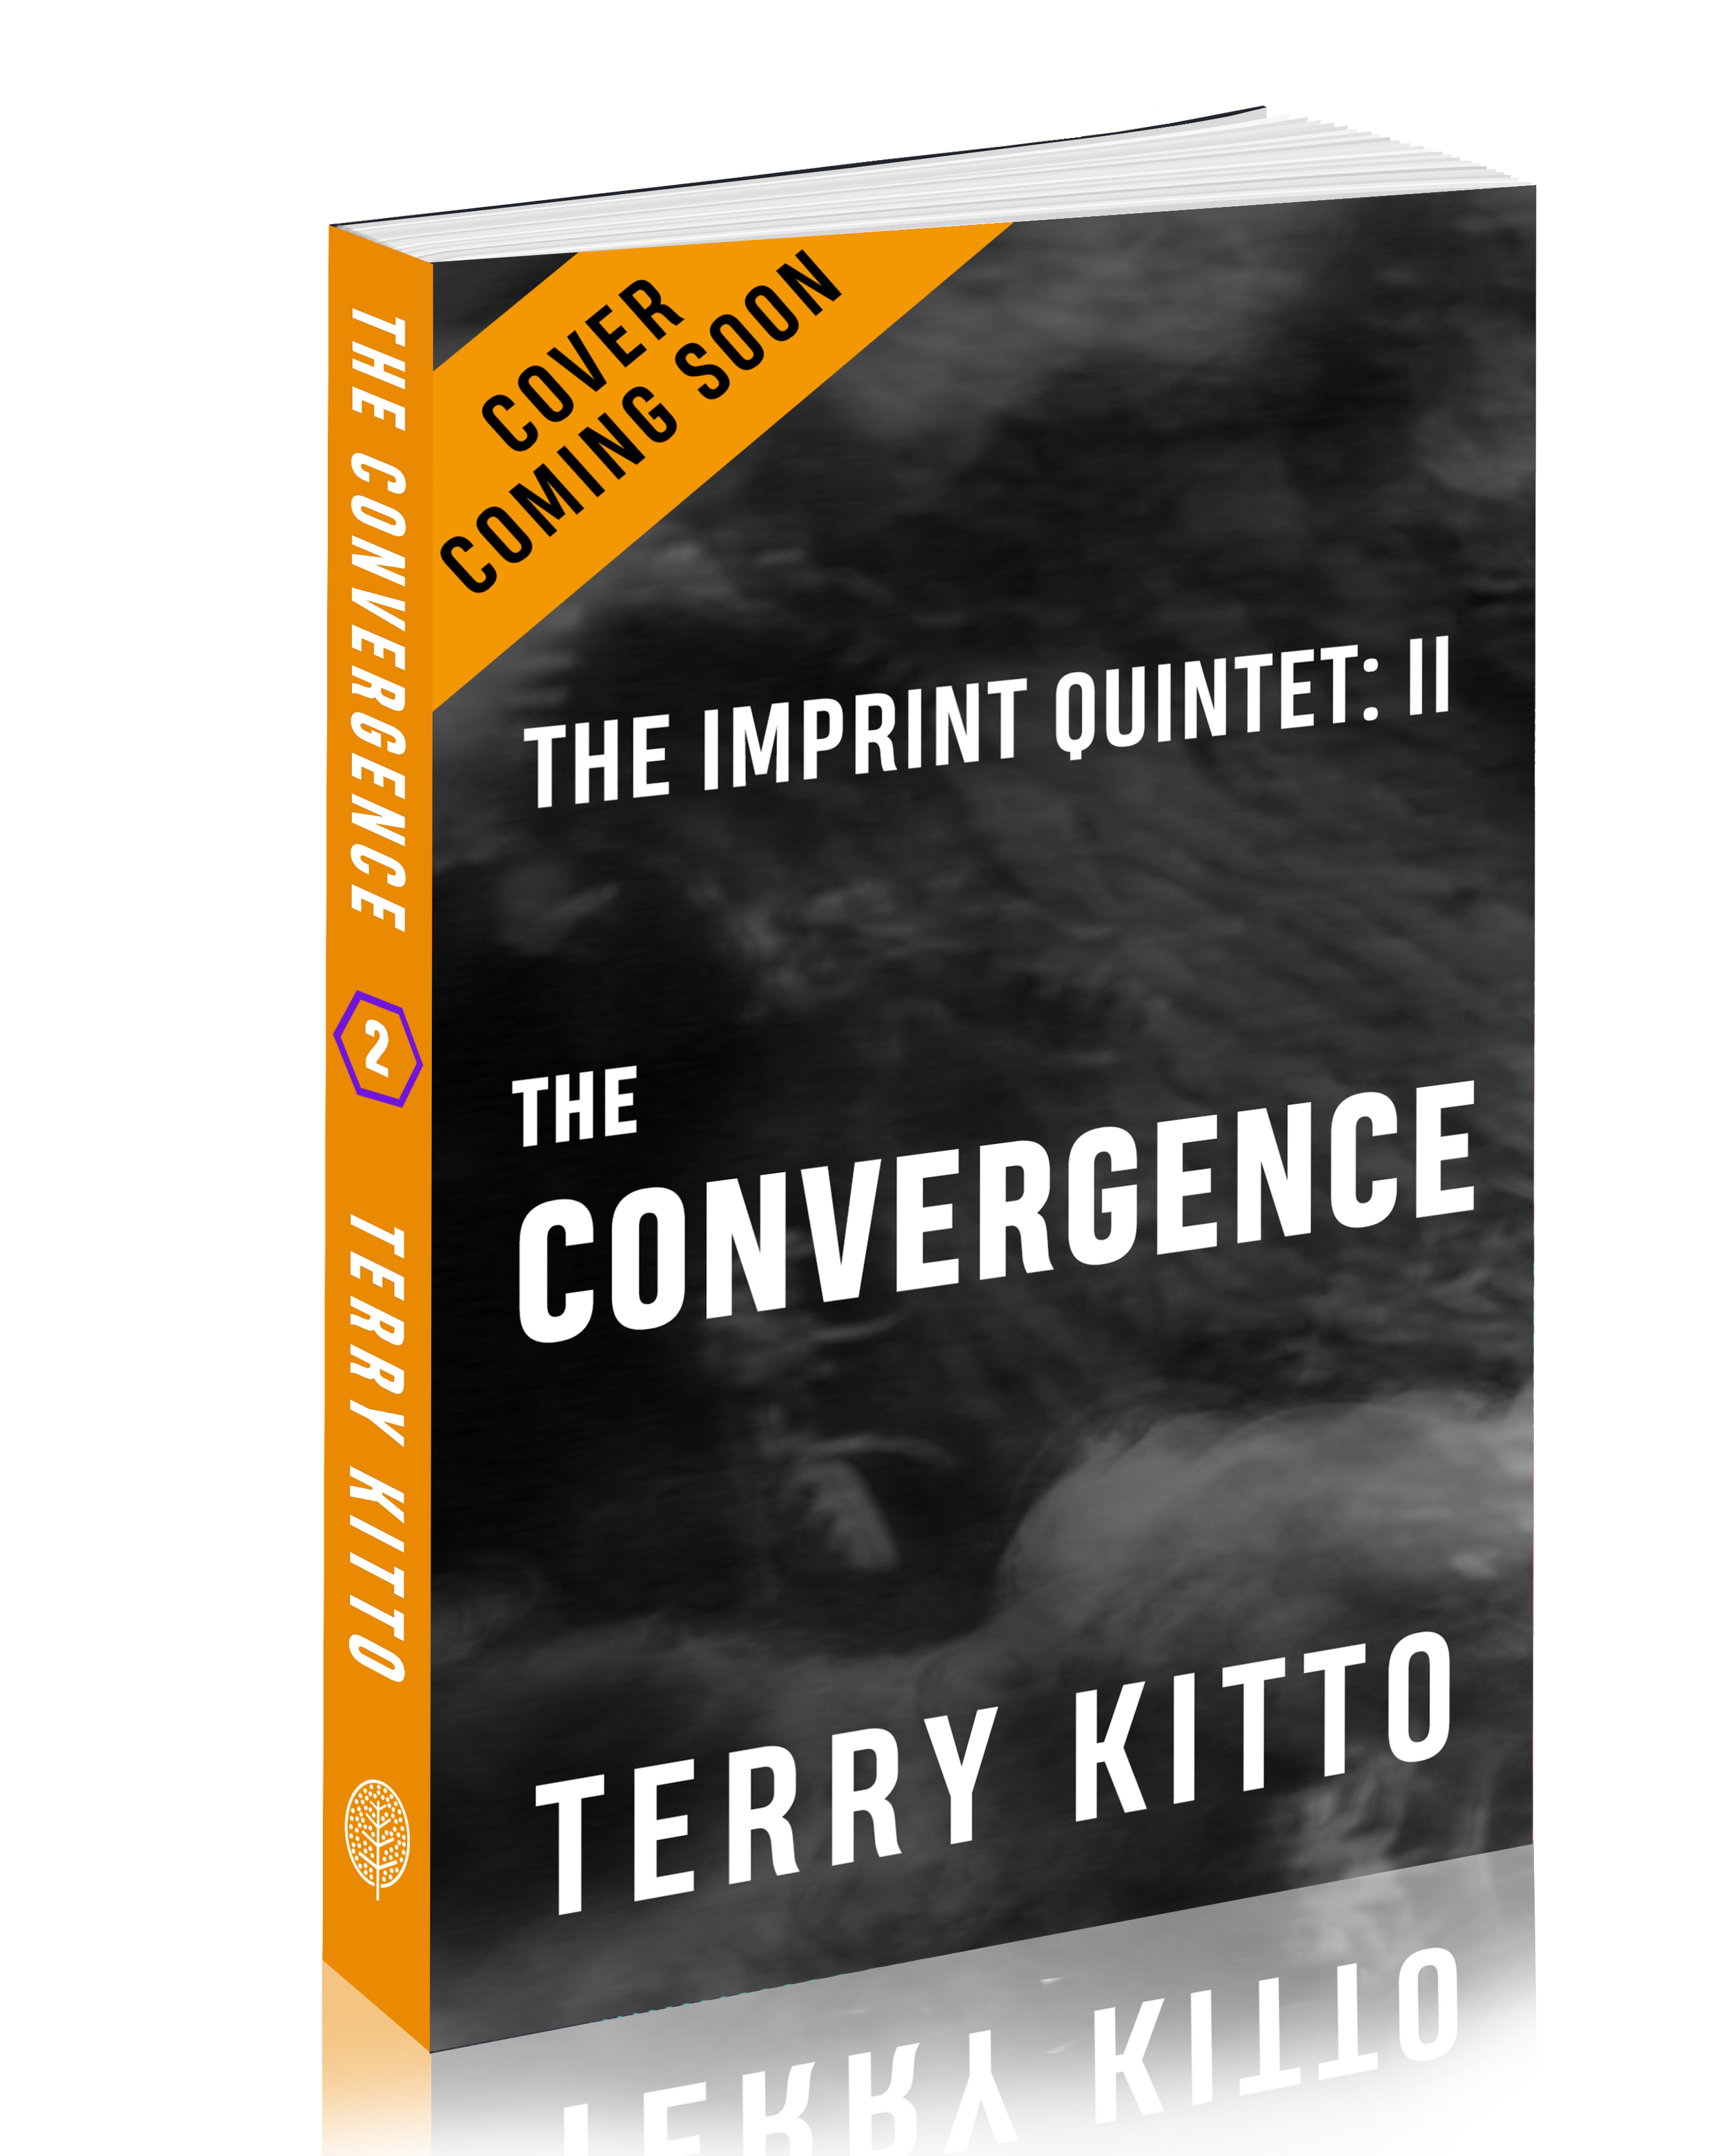 The Convergence (The Imprint Quintet: II)